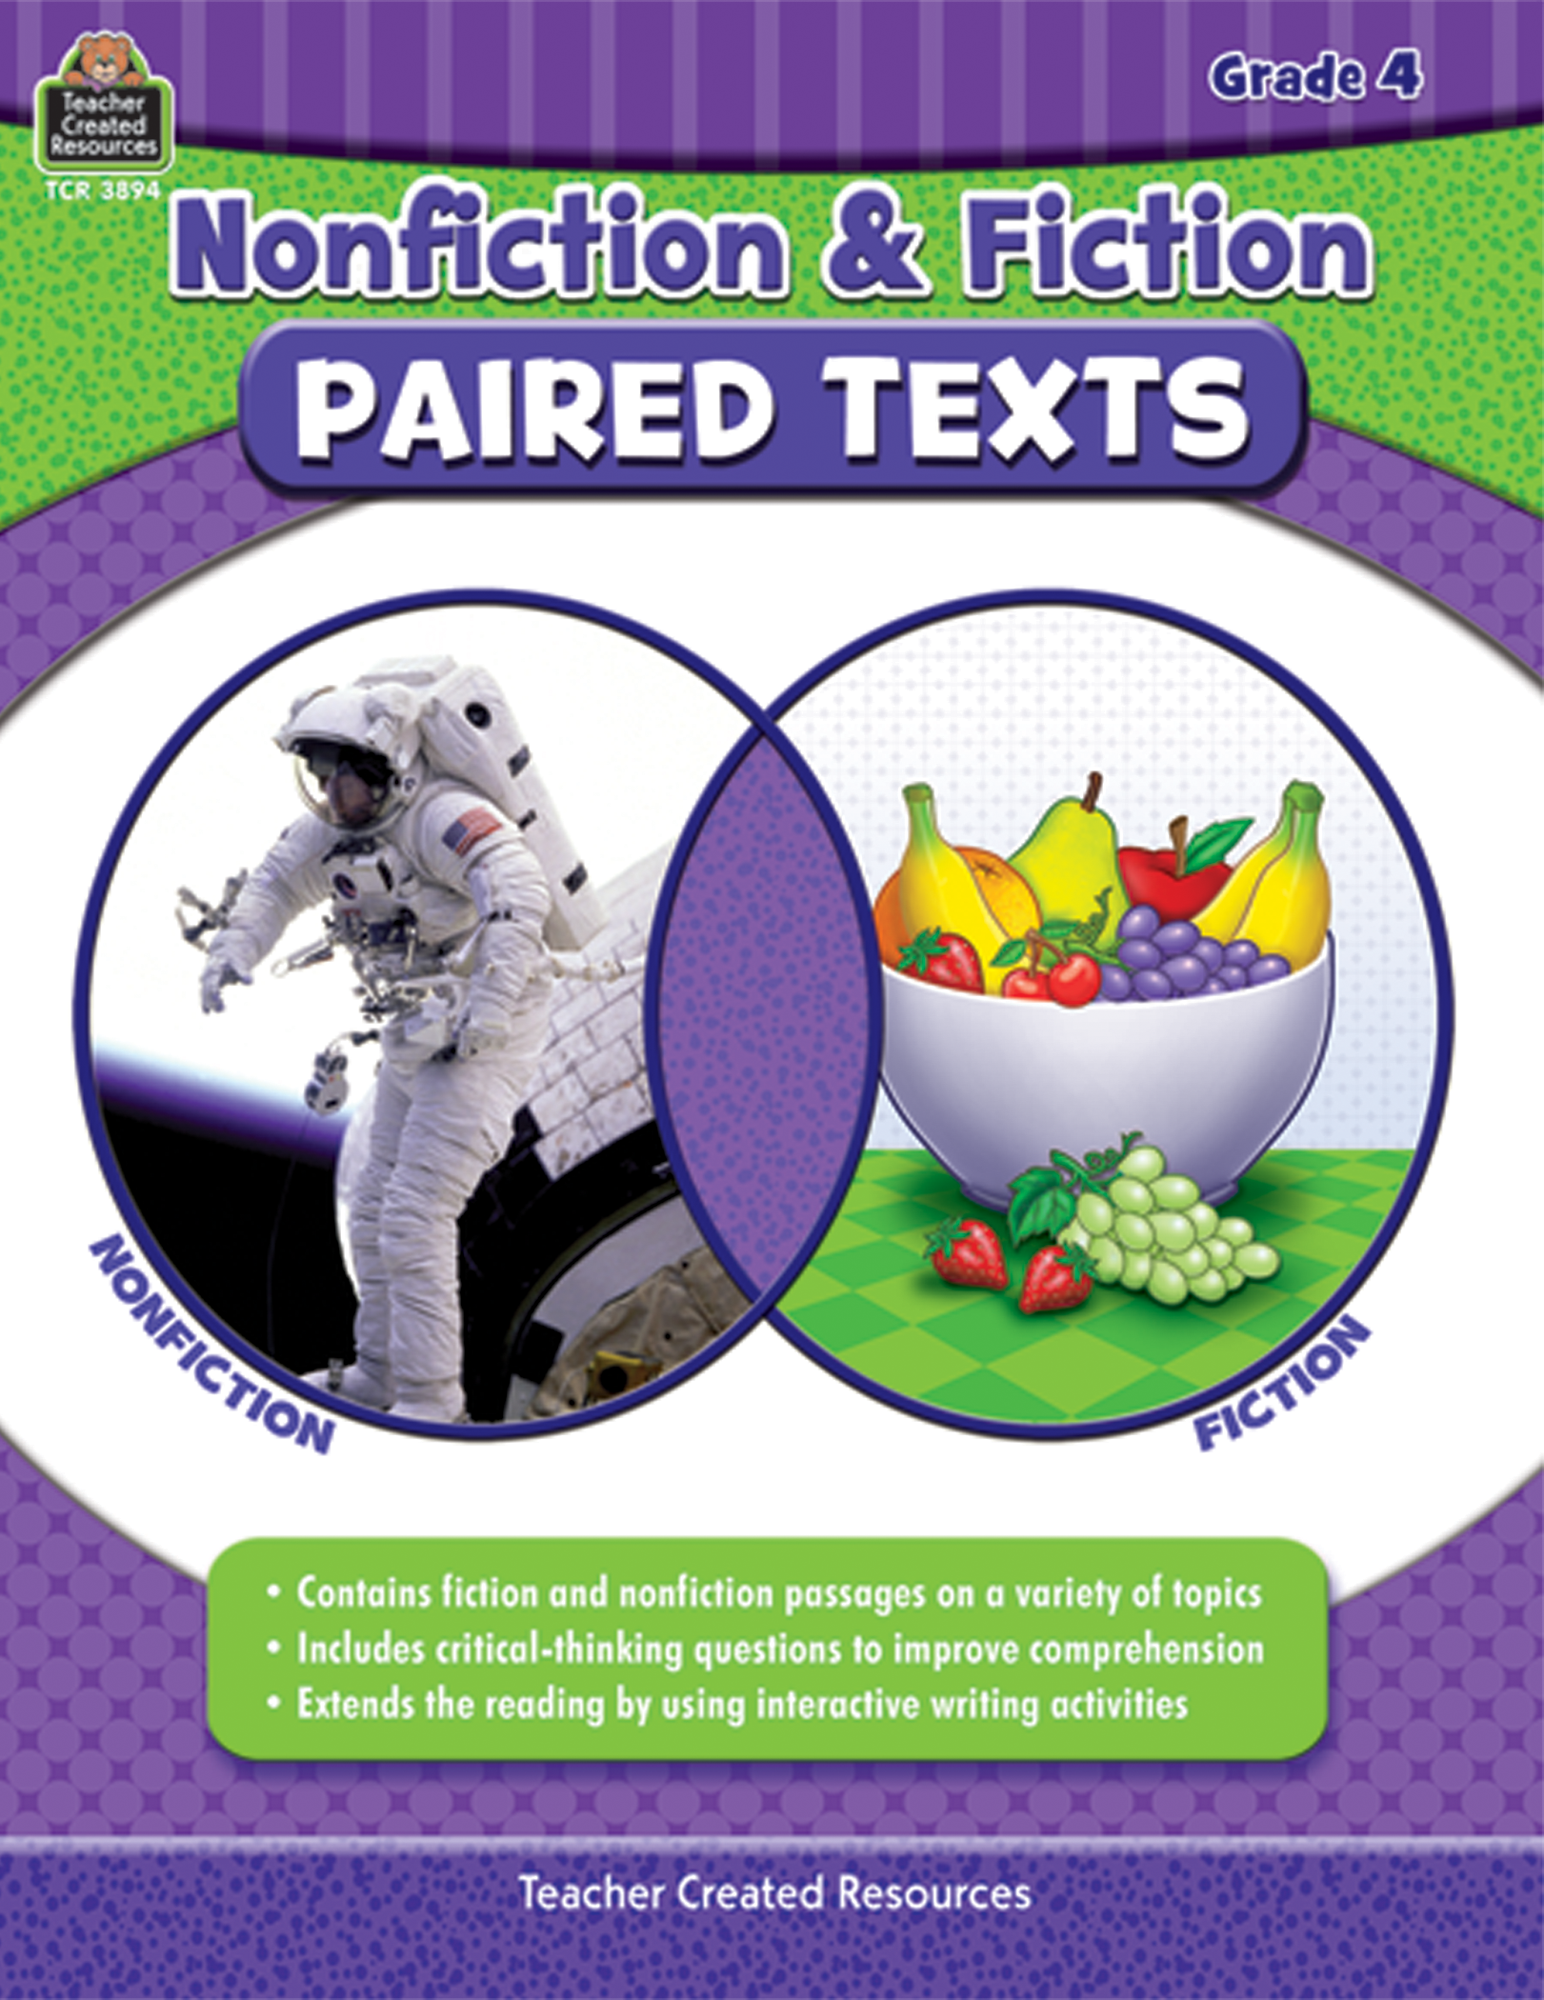 TCR3894　Created　Texts　Paired　Teacher　and　Nonfiction　Grade　Fiction　Resources